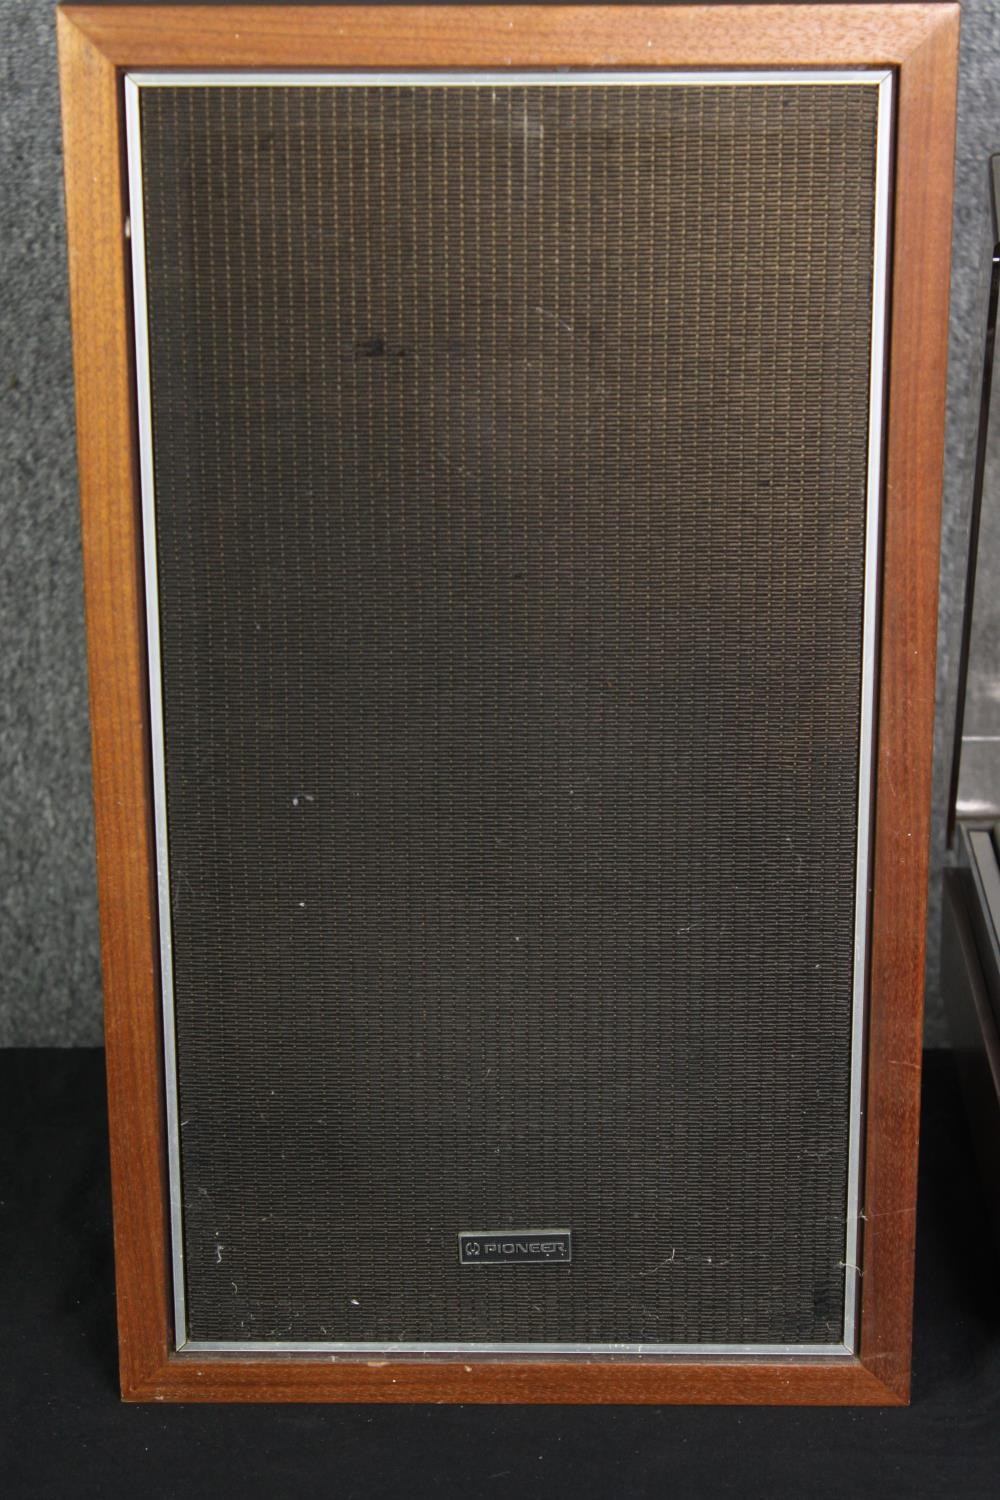 A Philips Automatic built-in turntable amp and radio, and a pair of Pioneer speakers. H.54 W.30 D. - Image 3 of 7